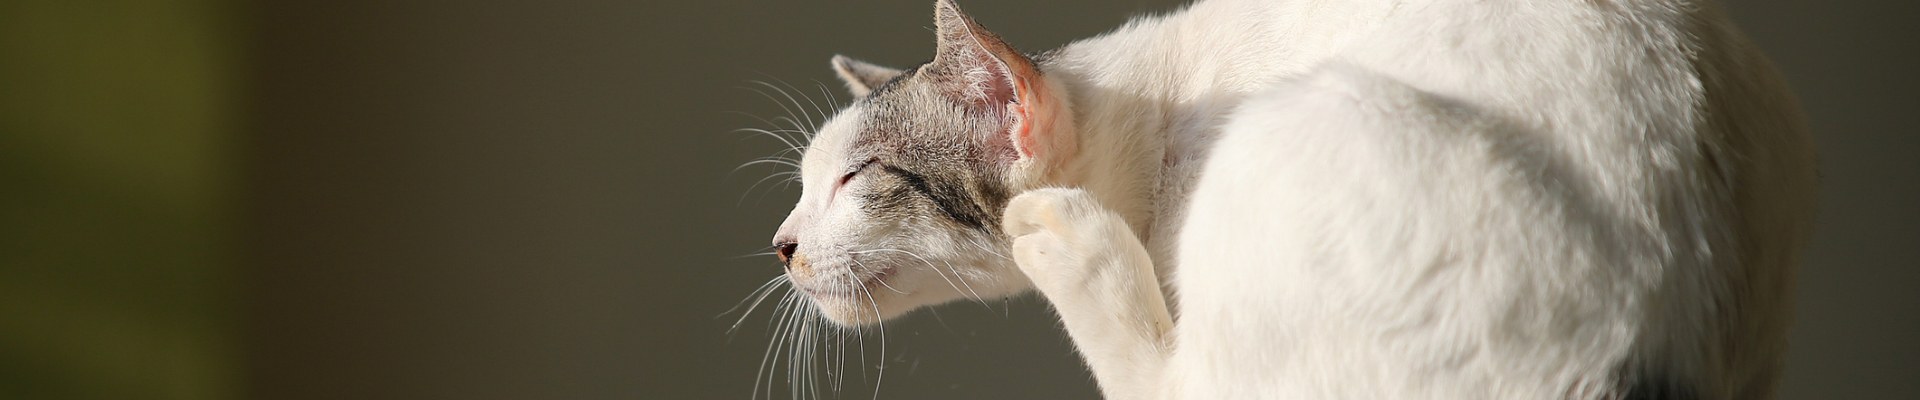 A grey and white cat scratching its ear